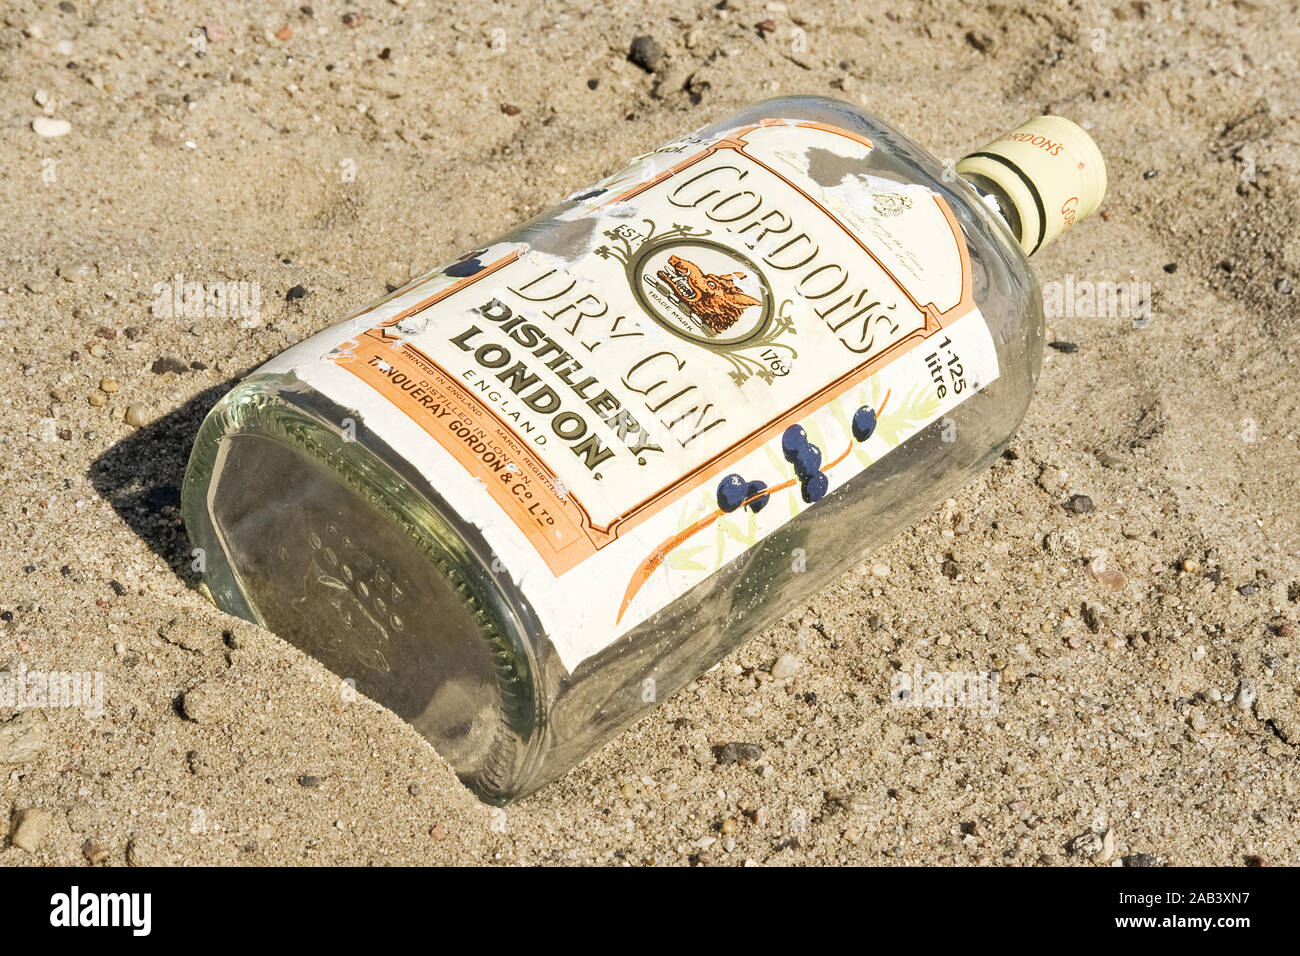 Leere Ginflasche am Strand |Empty gin bottle on the beach| Stock Photo